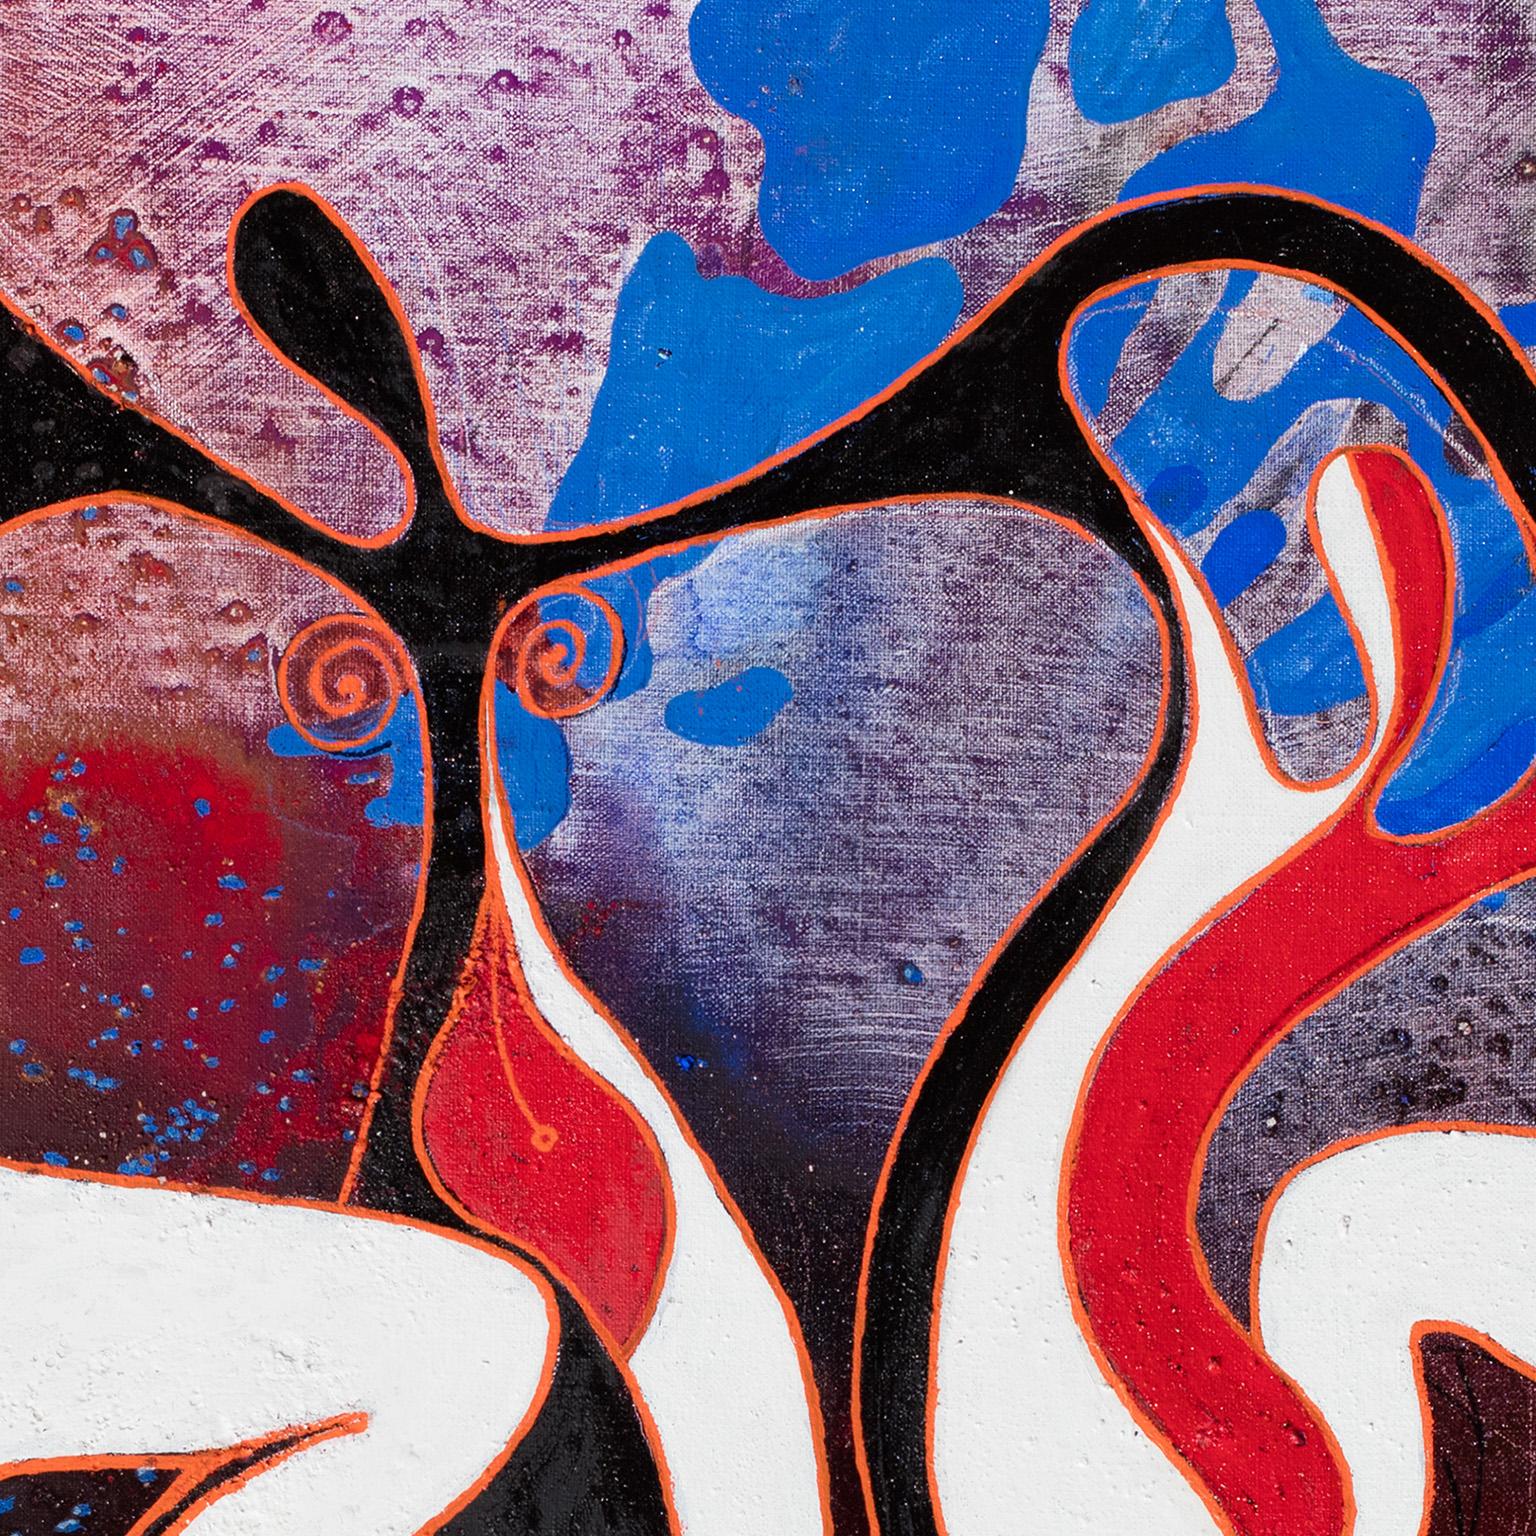 Dance Under the Moon - Dancing Figures Reminiscent of Matisse, Red and Blue - Painting by Gian Berto Vanni